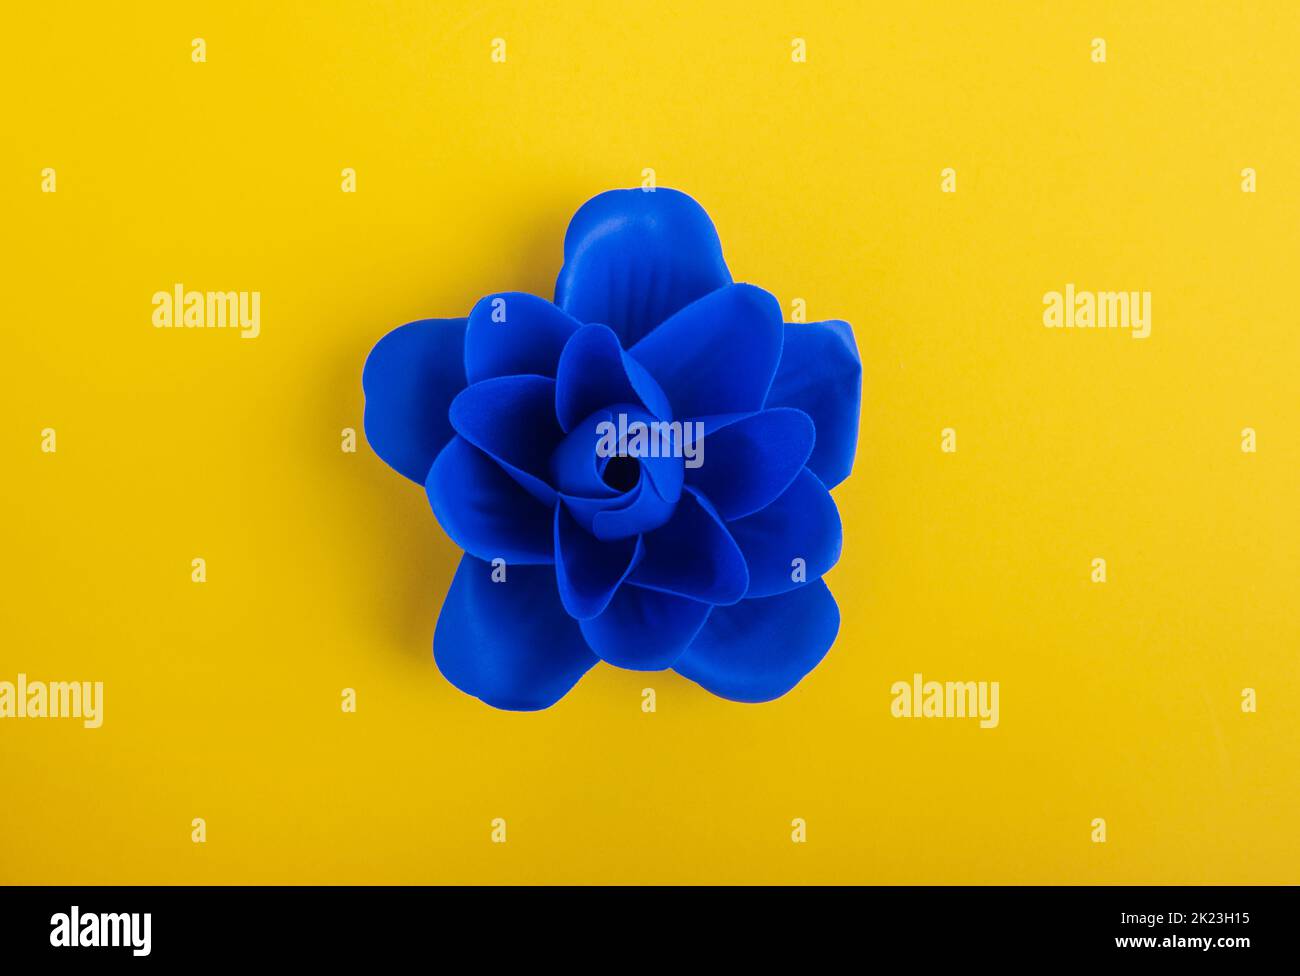 Blue flower on a yellow background Stock Photo